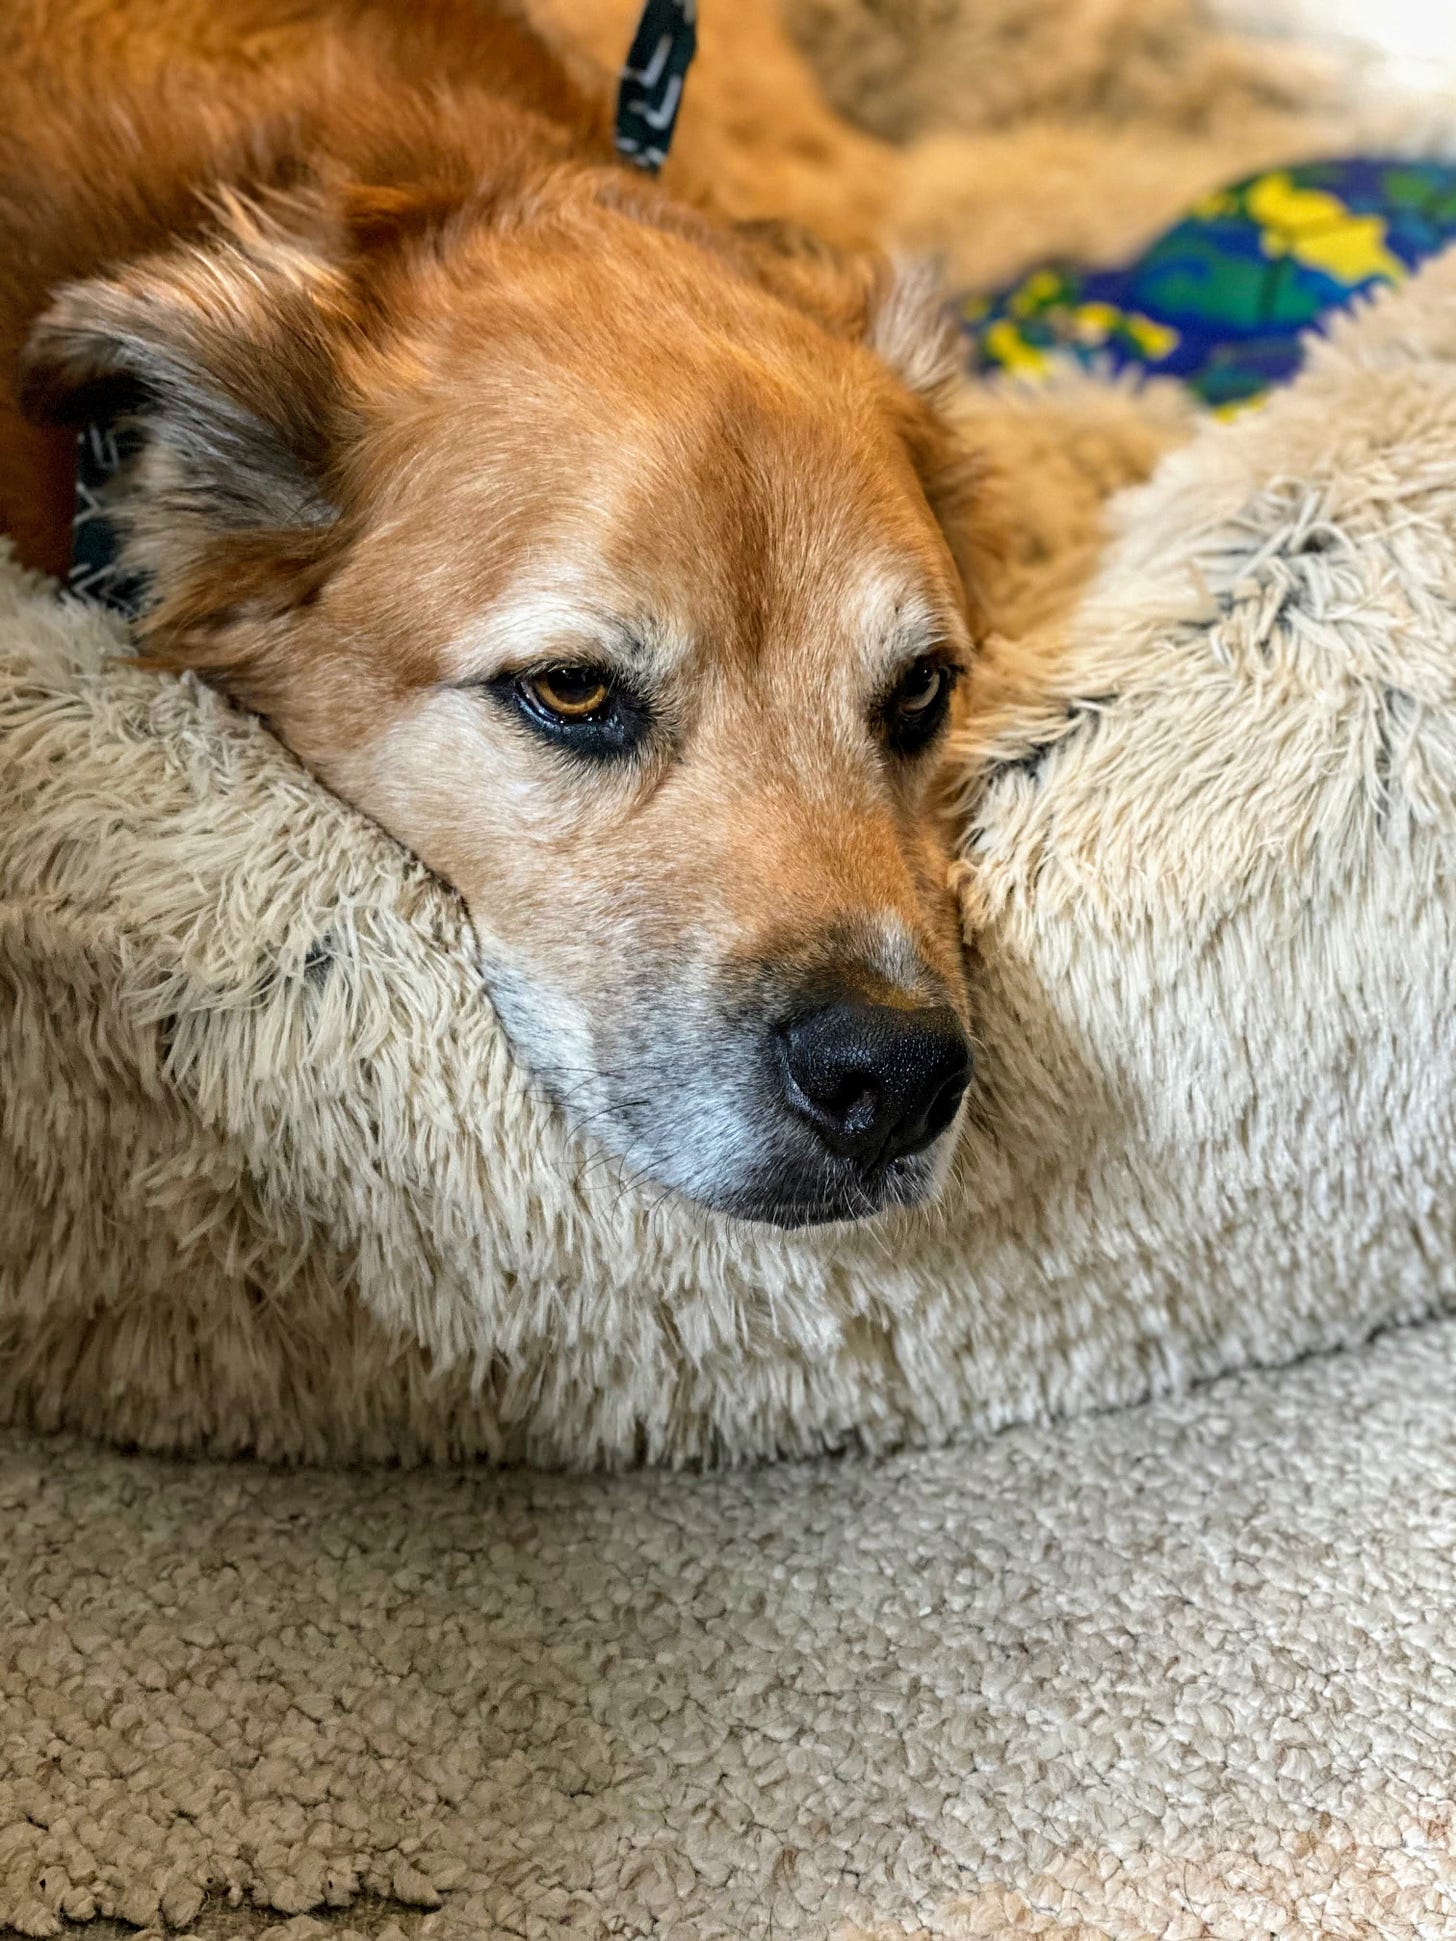 New dog bed for Forest! (Photo: Jennifer Roberts)